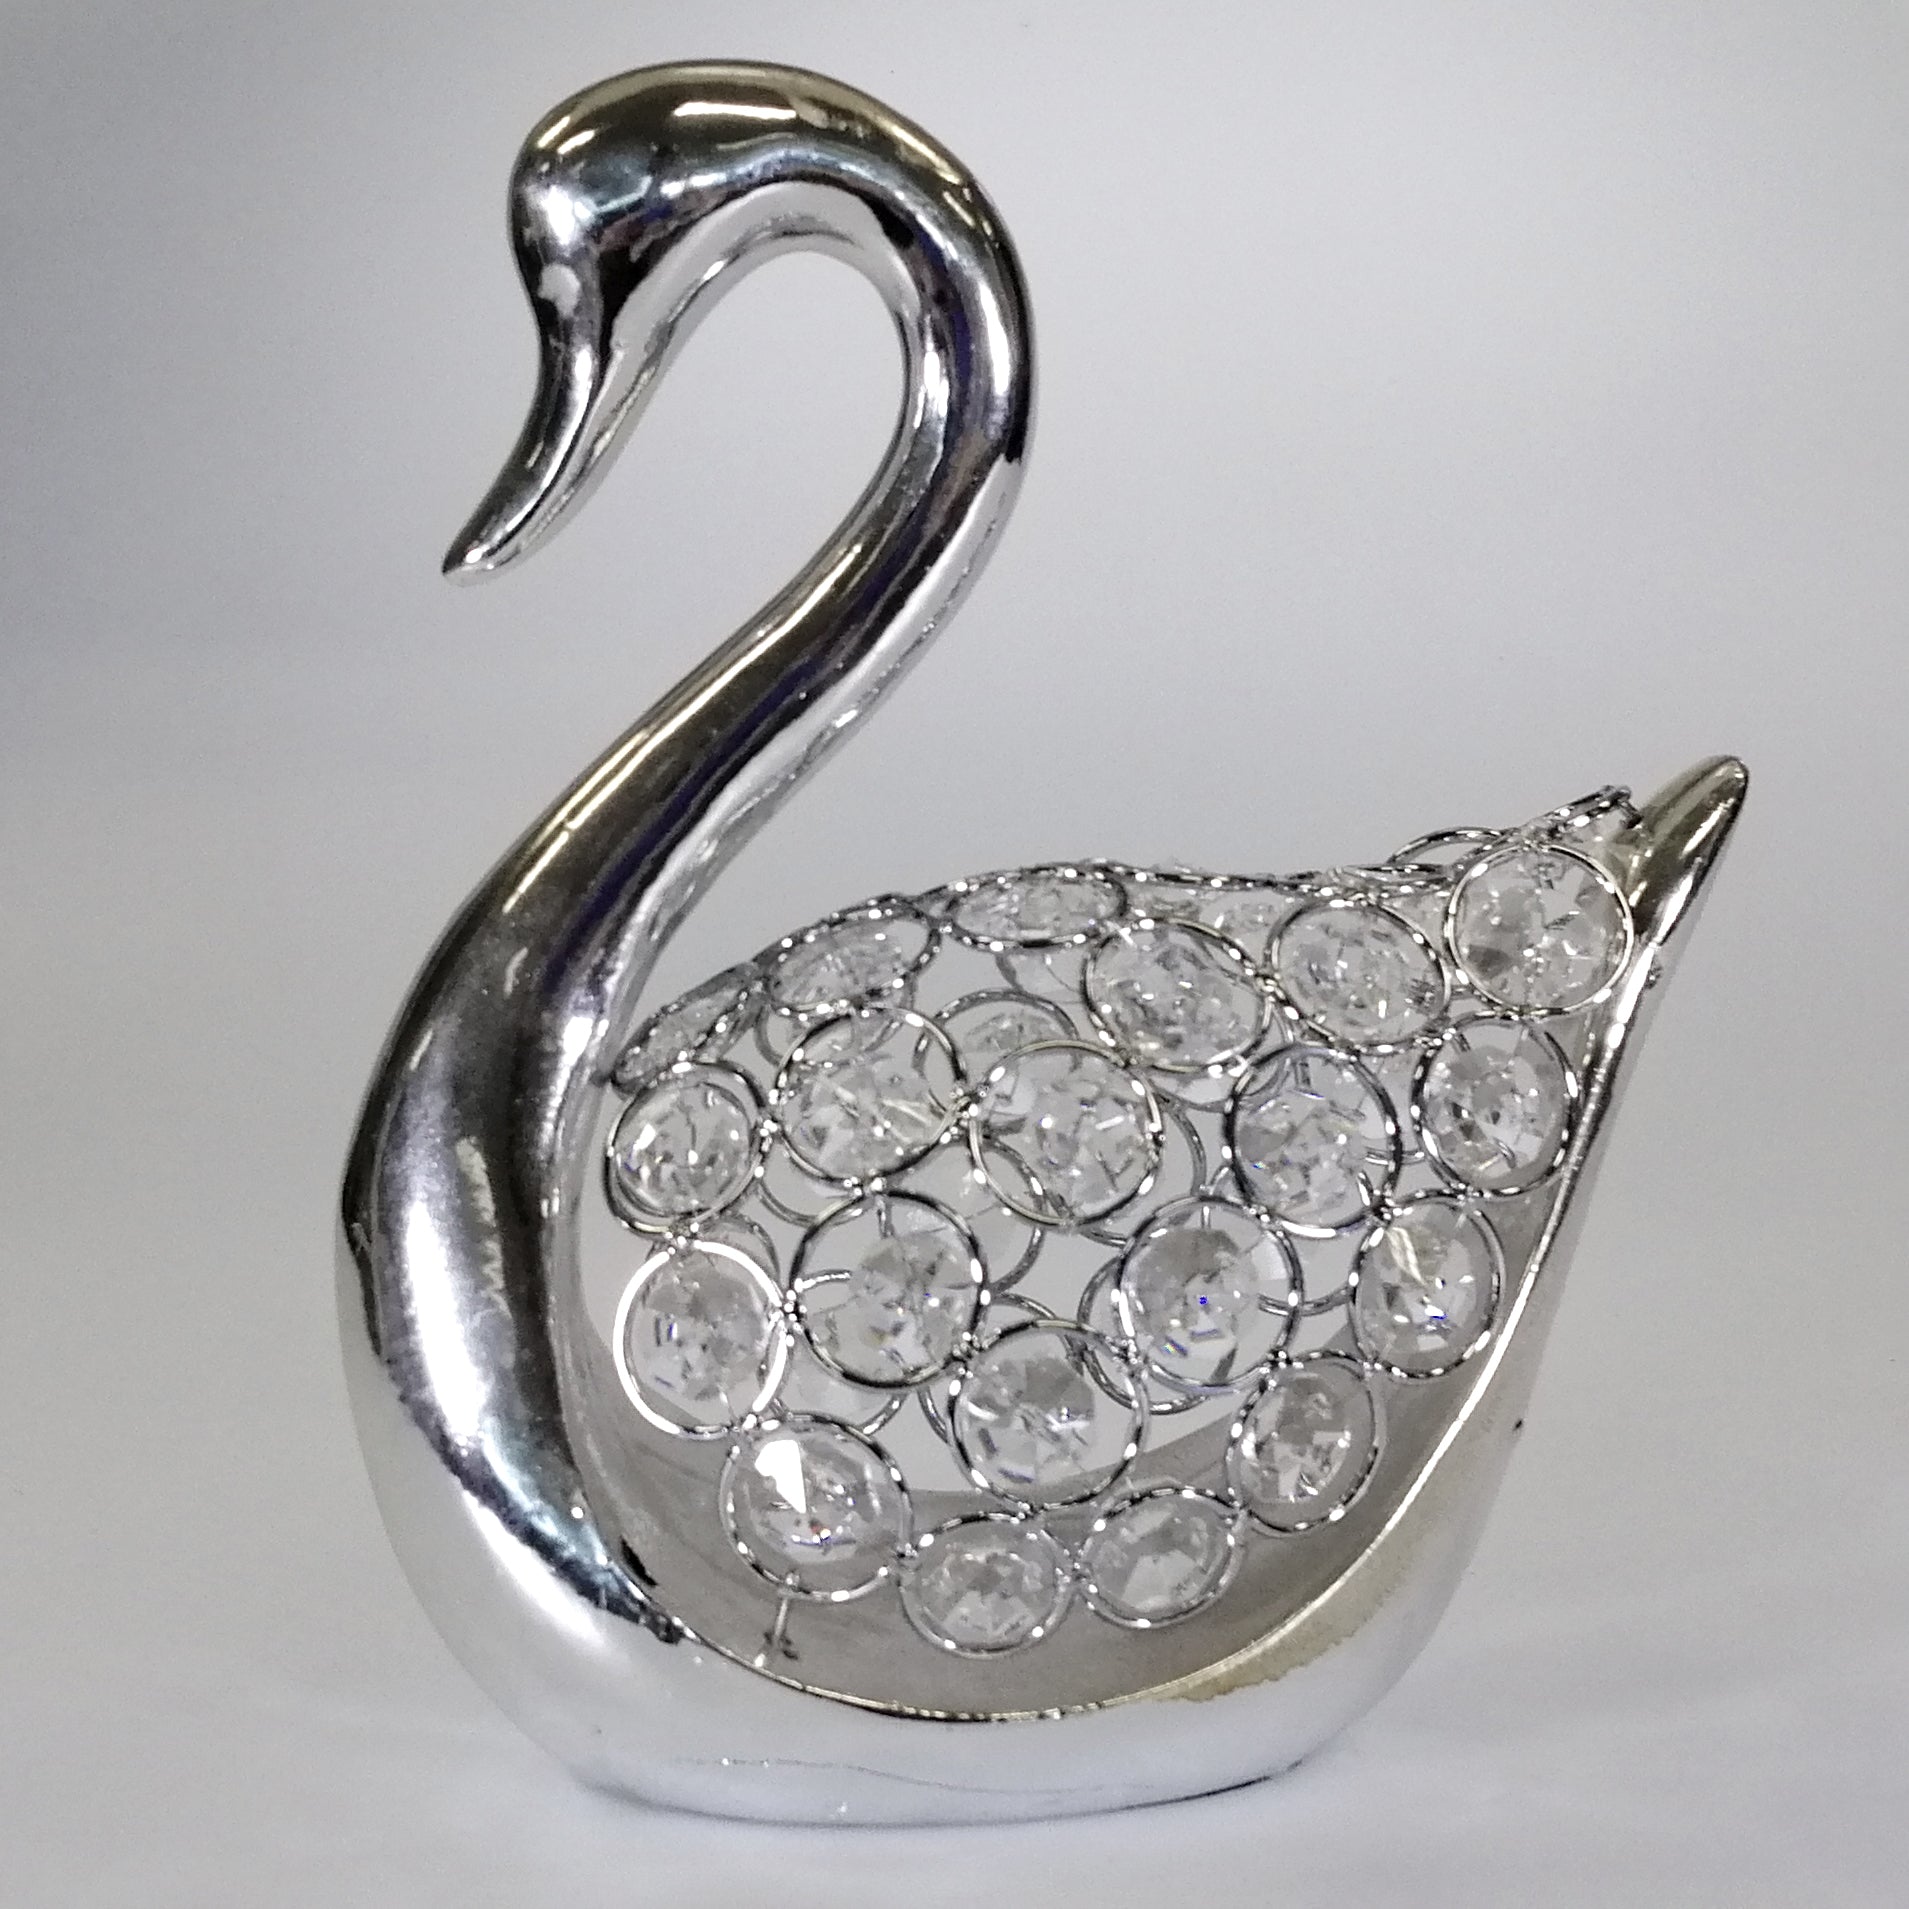 Electroplated Bling Swan Ornament